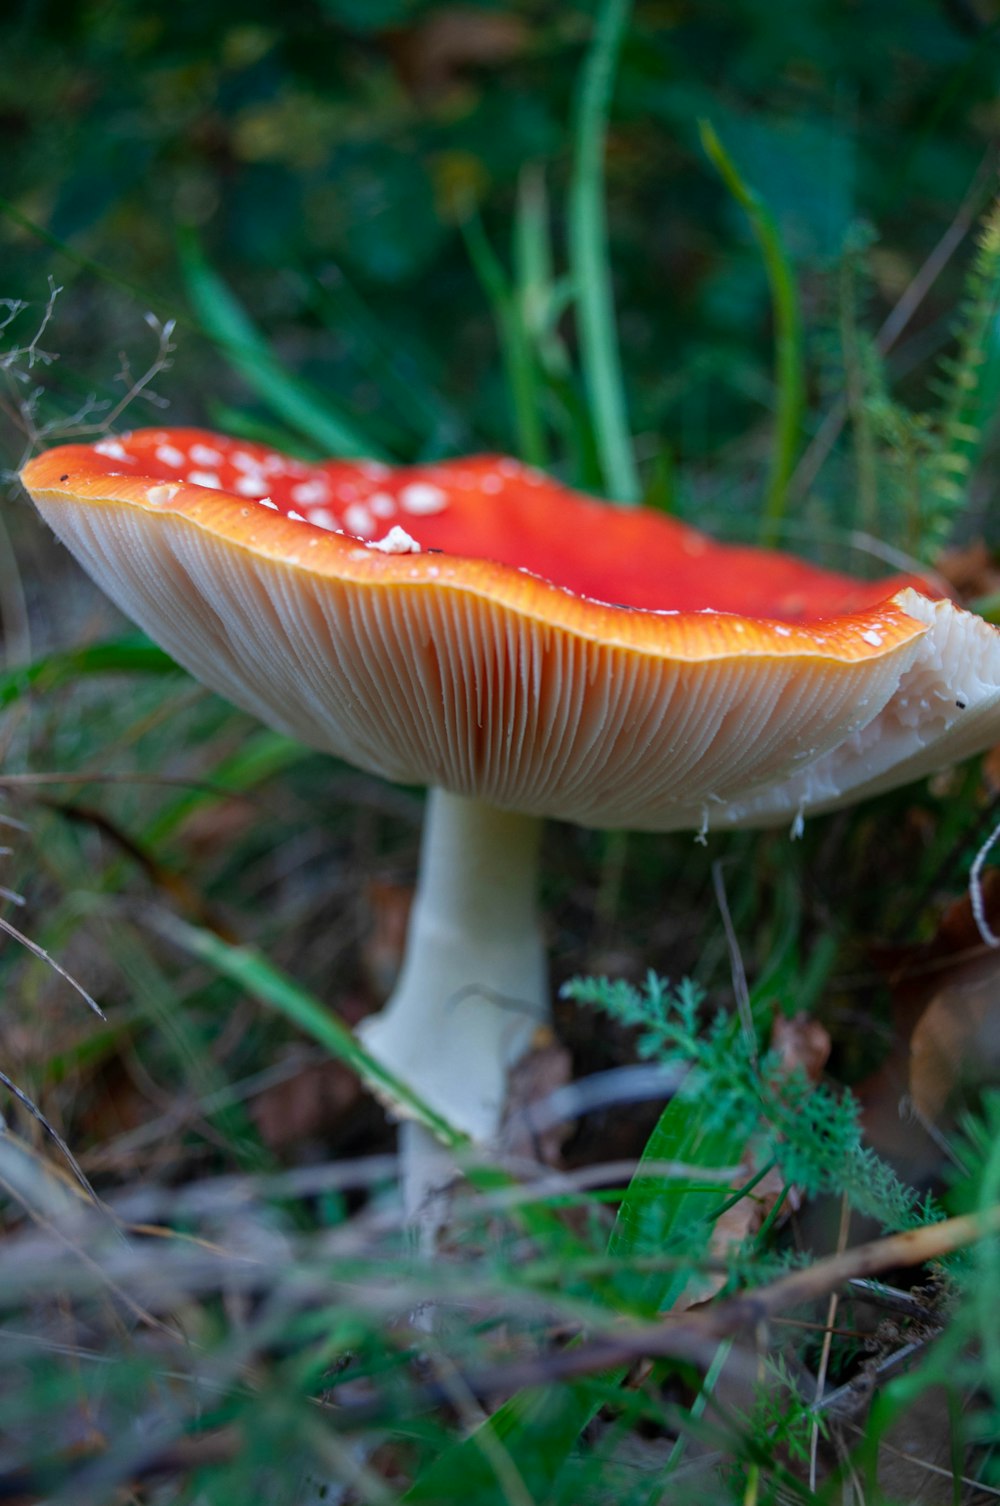 red and white mushroom in close up photography